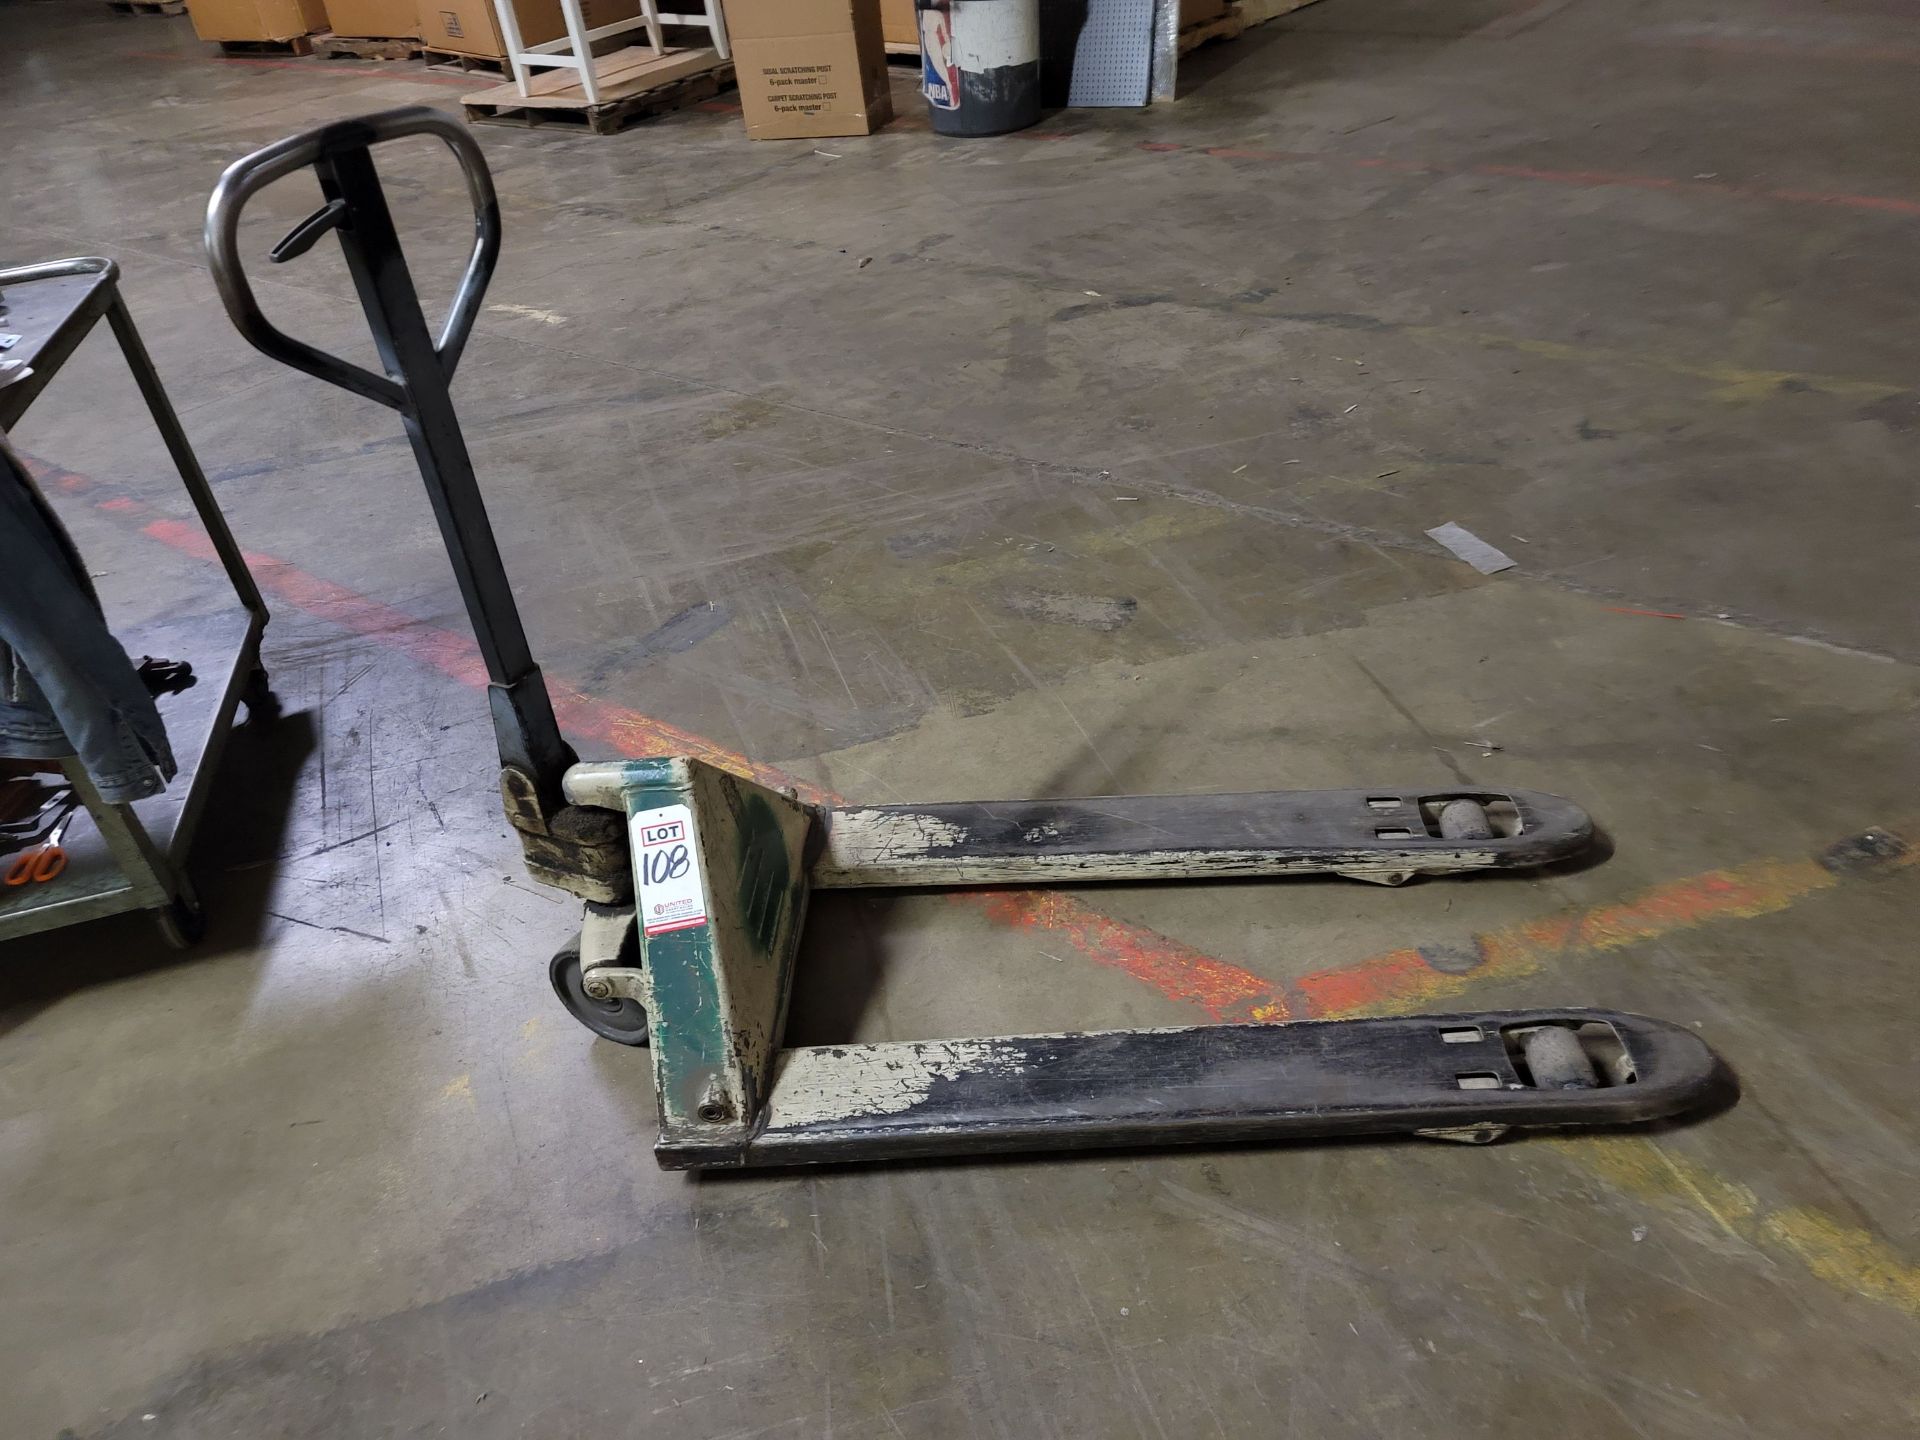 CROWN PALLET JACK, 5,000 LB CAPACITY, NEEDS TO BE REBUILT/SEALS (WON'T STAY ELEVATED), MODEL